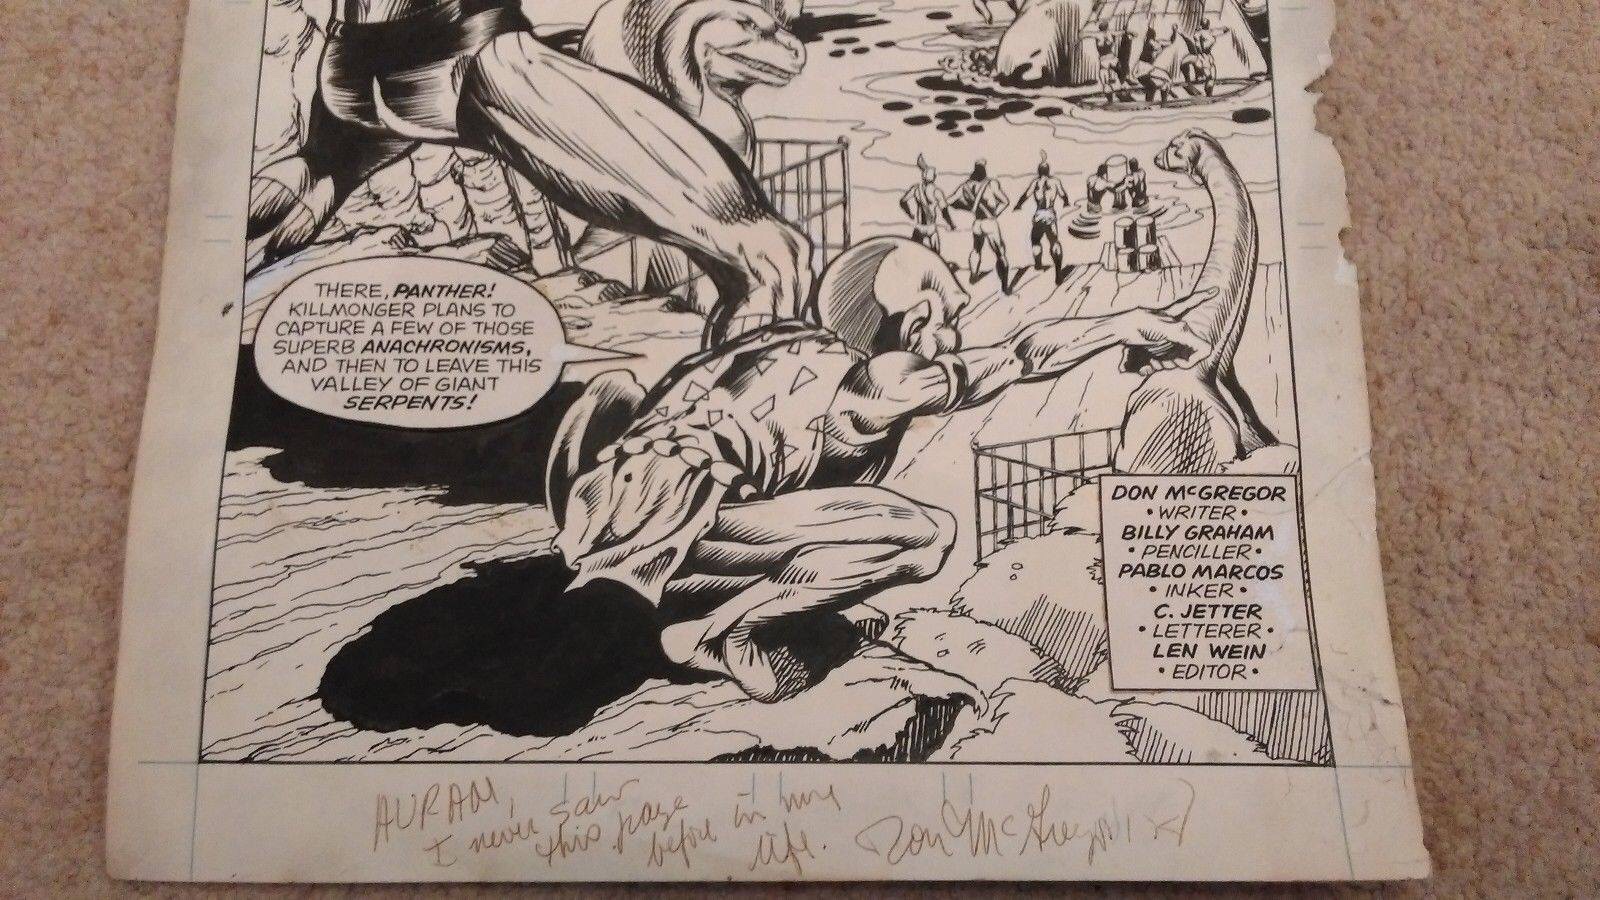 Writer of Jungle Action Don McGregor has also signed the artwork, presumably for a buyer of the page at a later date